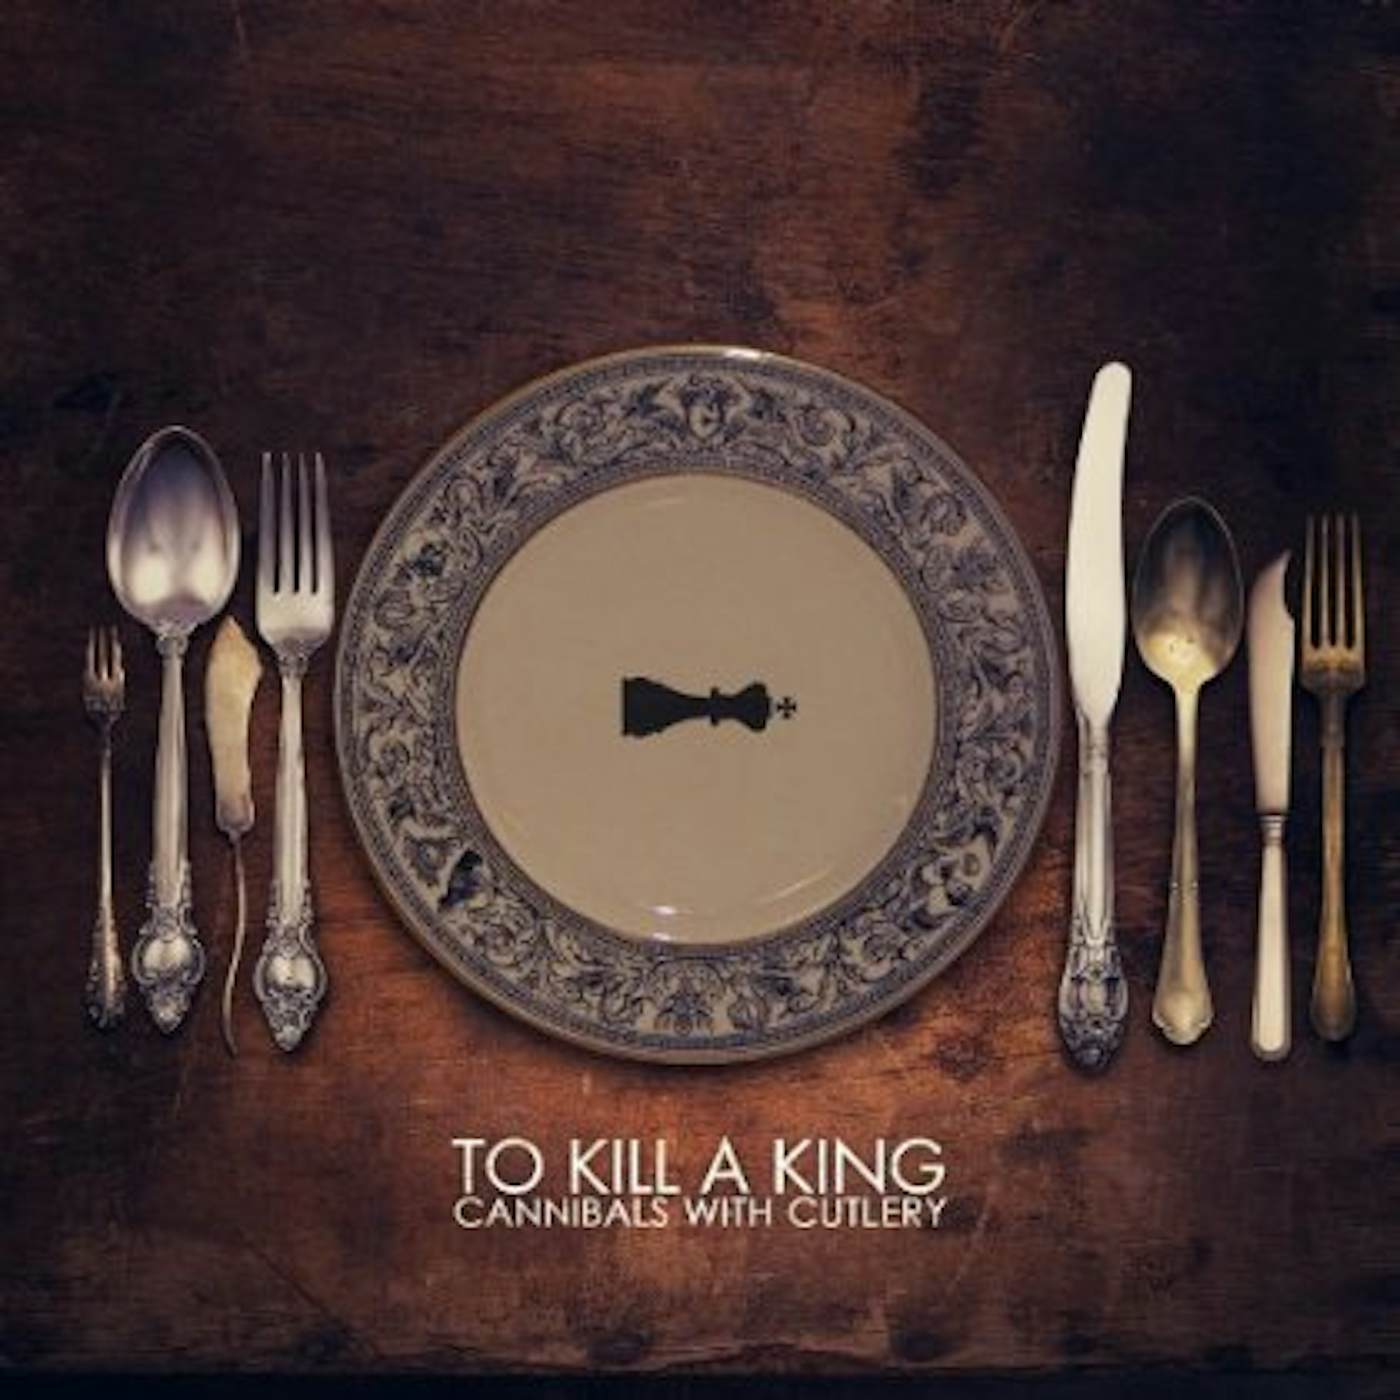 To Kill A King Cannibals With Cutlery Vinyl Record